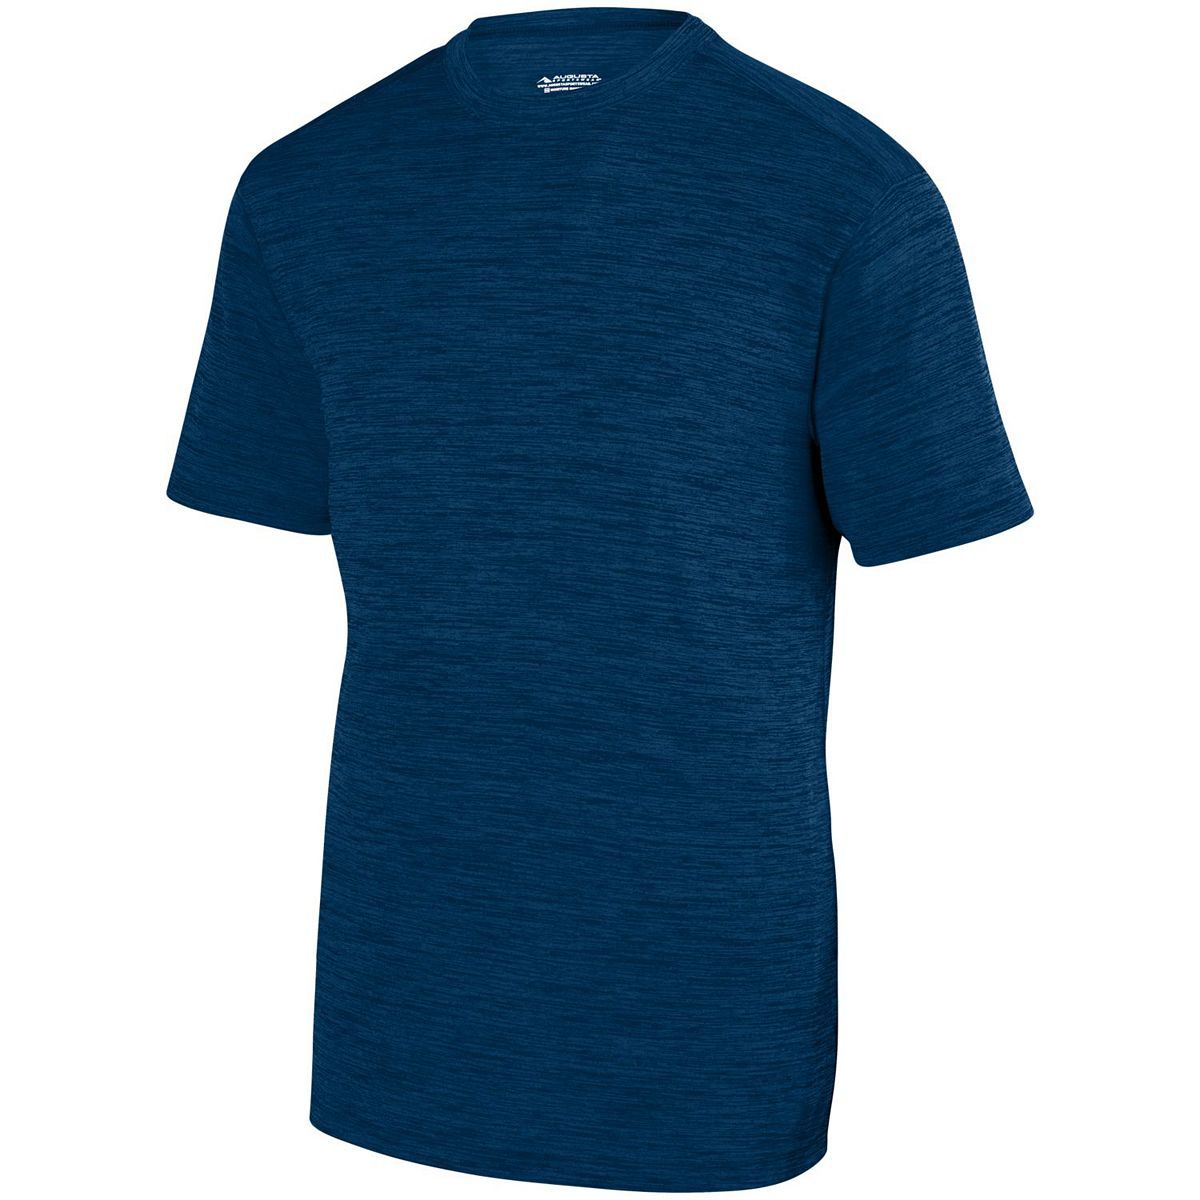 Augusta Sportswear Shadow Tonal Heather Training Tee in Navy  -Part of the Adult, Adult-Tee-Shirt, T-Shirts, Augusta-Products, Shirts, Tonal-Fleece-Collection product lines at KanaleyCreations.com